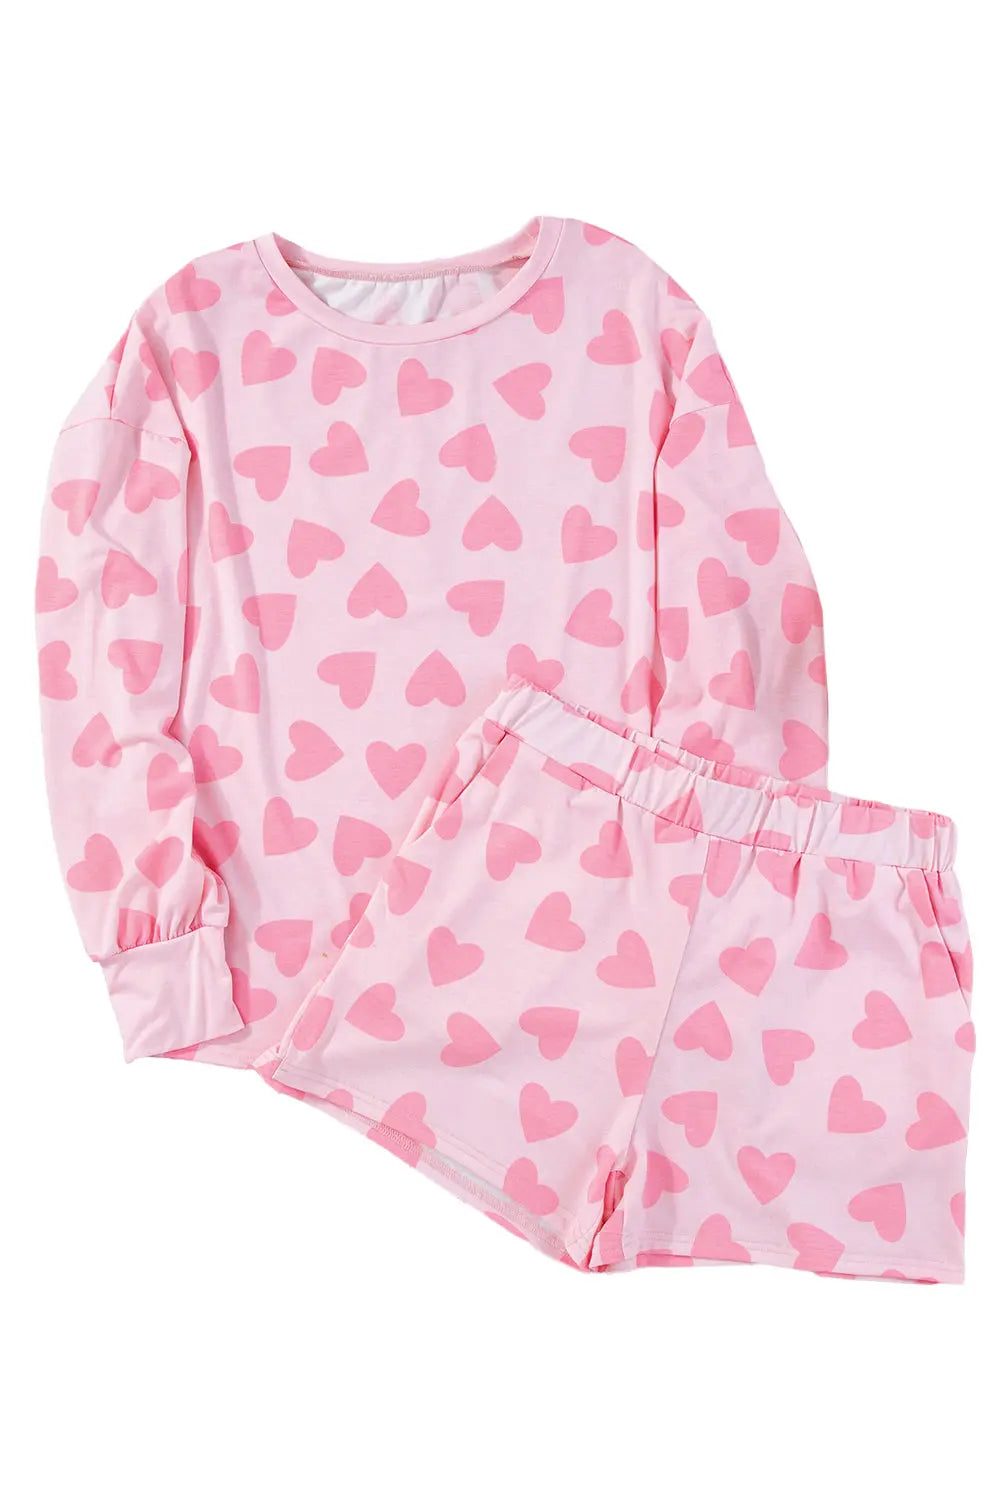 - Valentine Heart Shape Print Long Sleeve Top Shorts Lounge Outfit Set - womens short set at TFC&H Co.